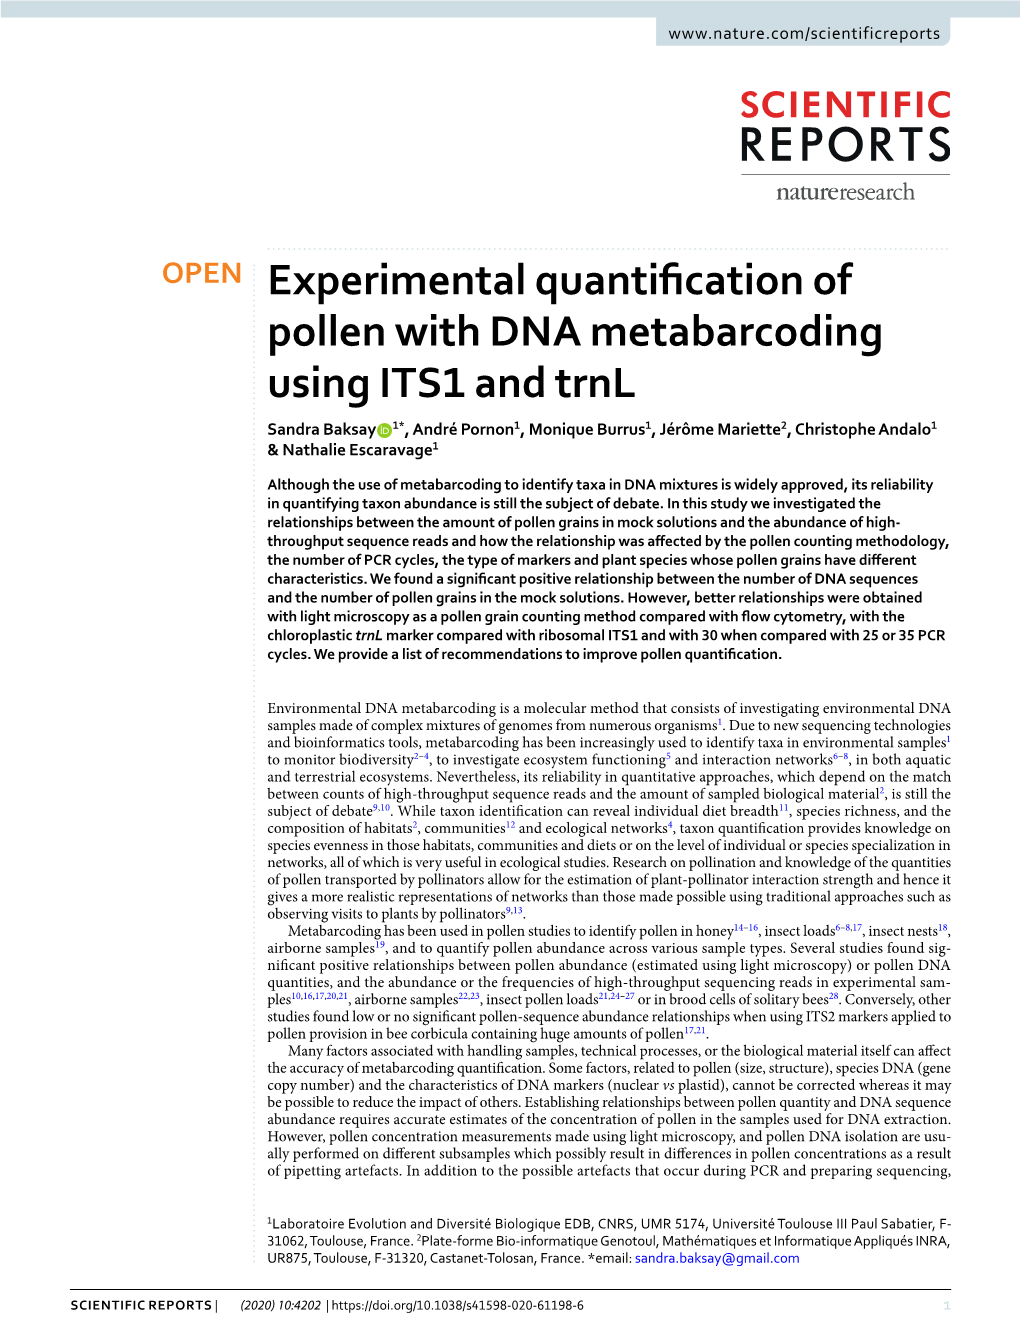 Experimental Quantification of Pollen with DNA Metabarcoding Using